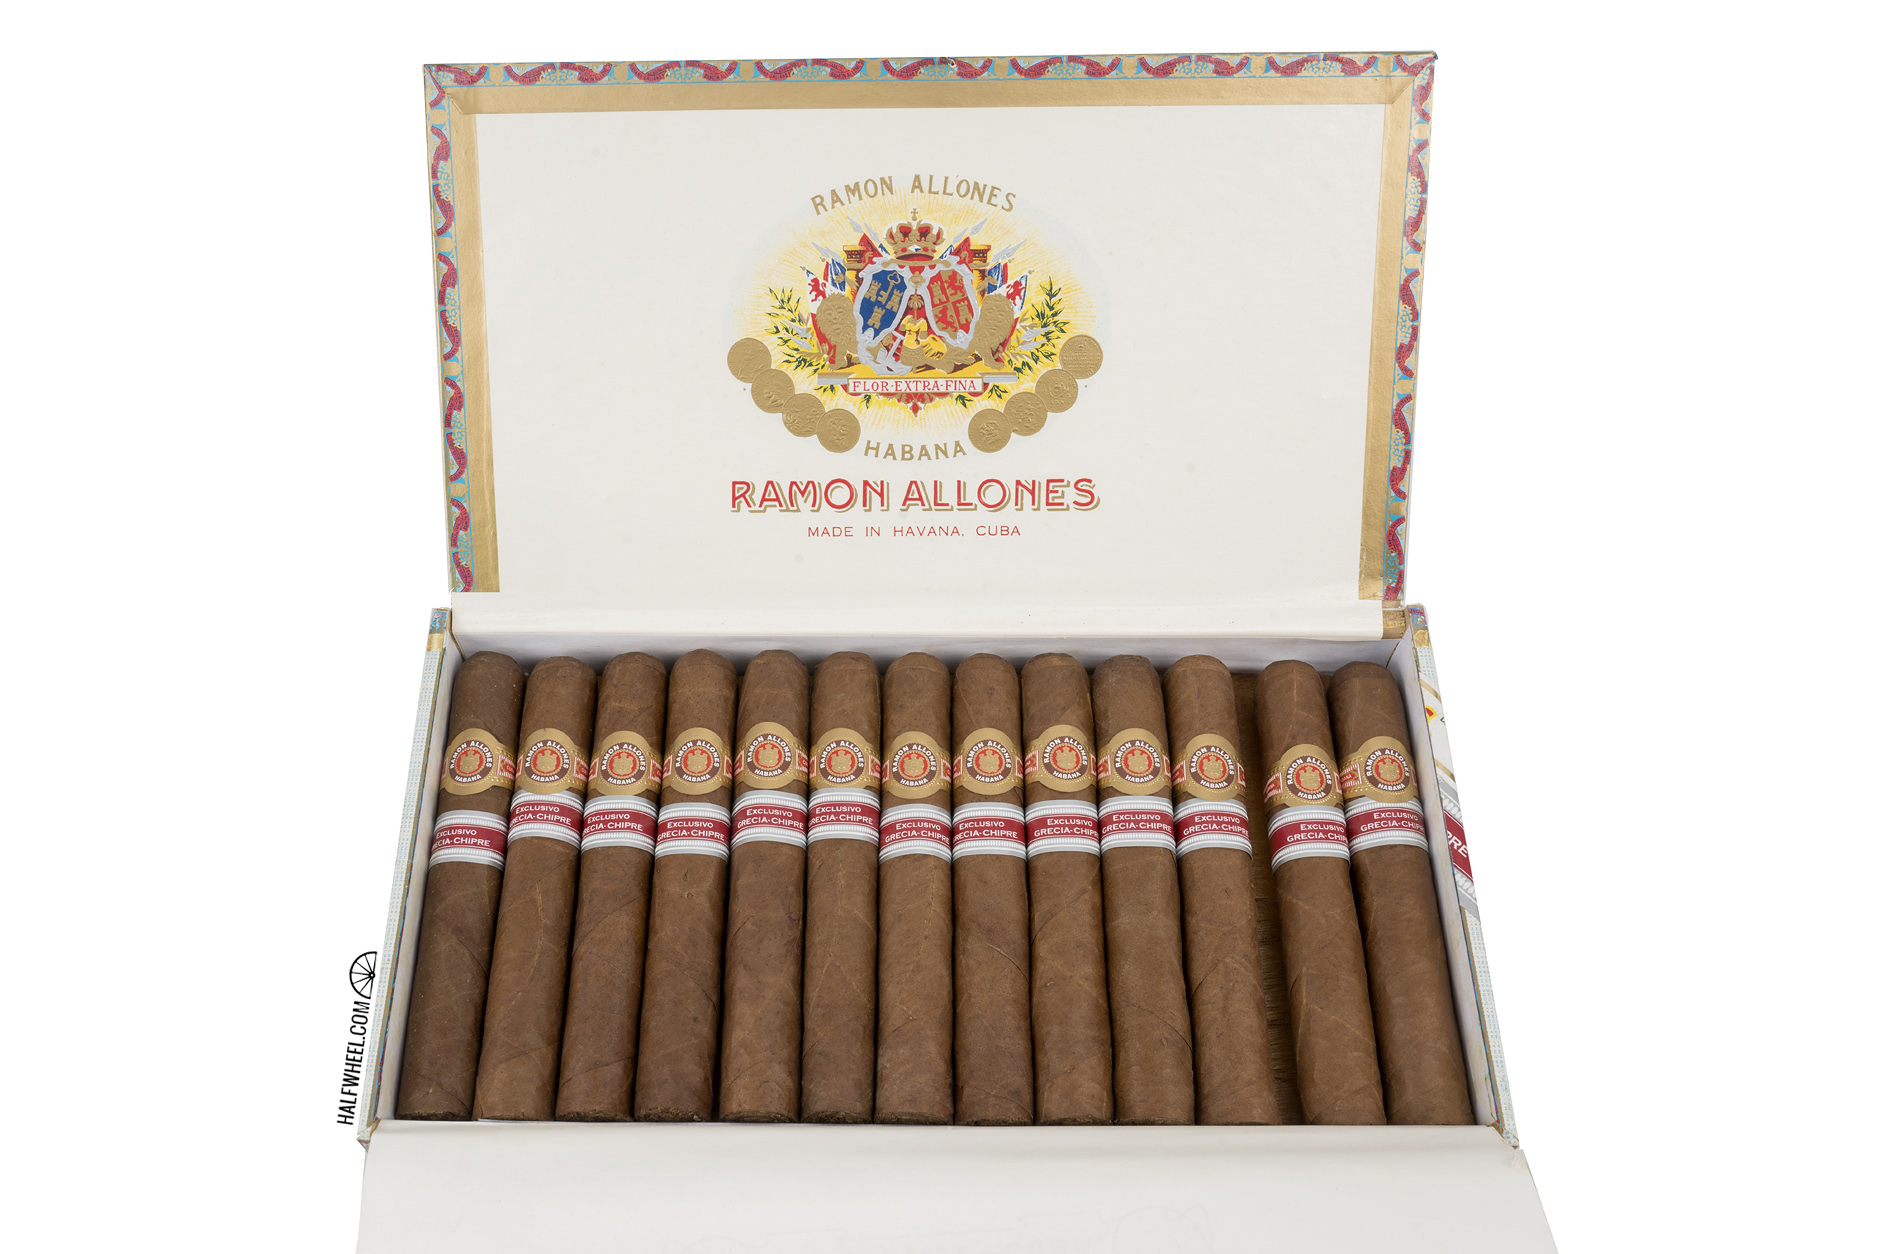 What does the box code on cigars mean?